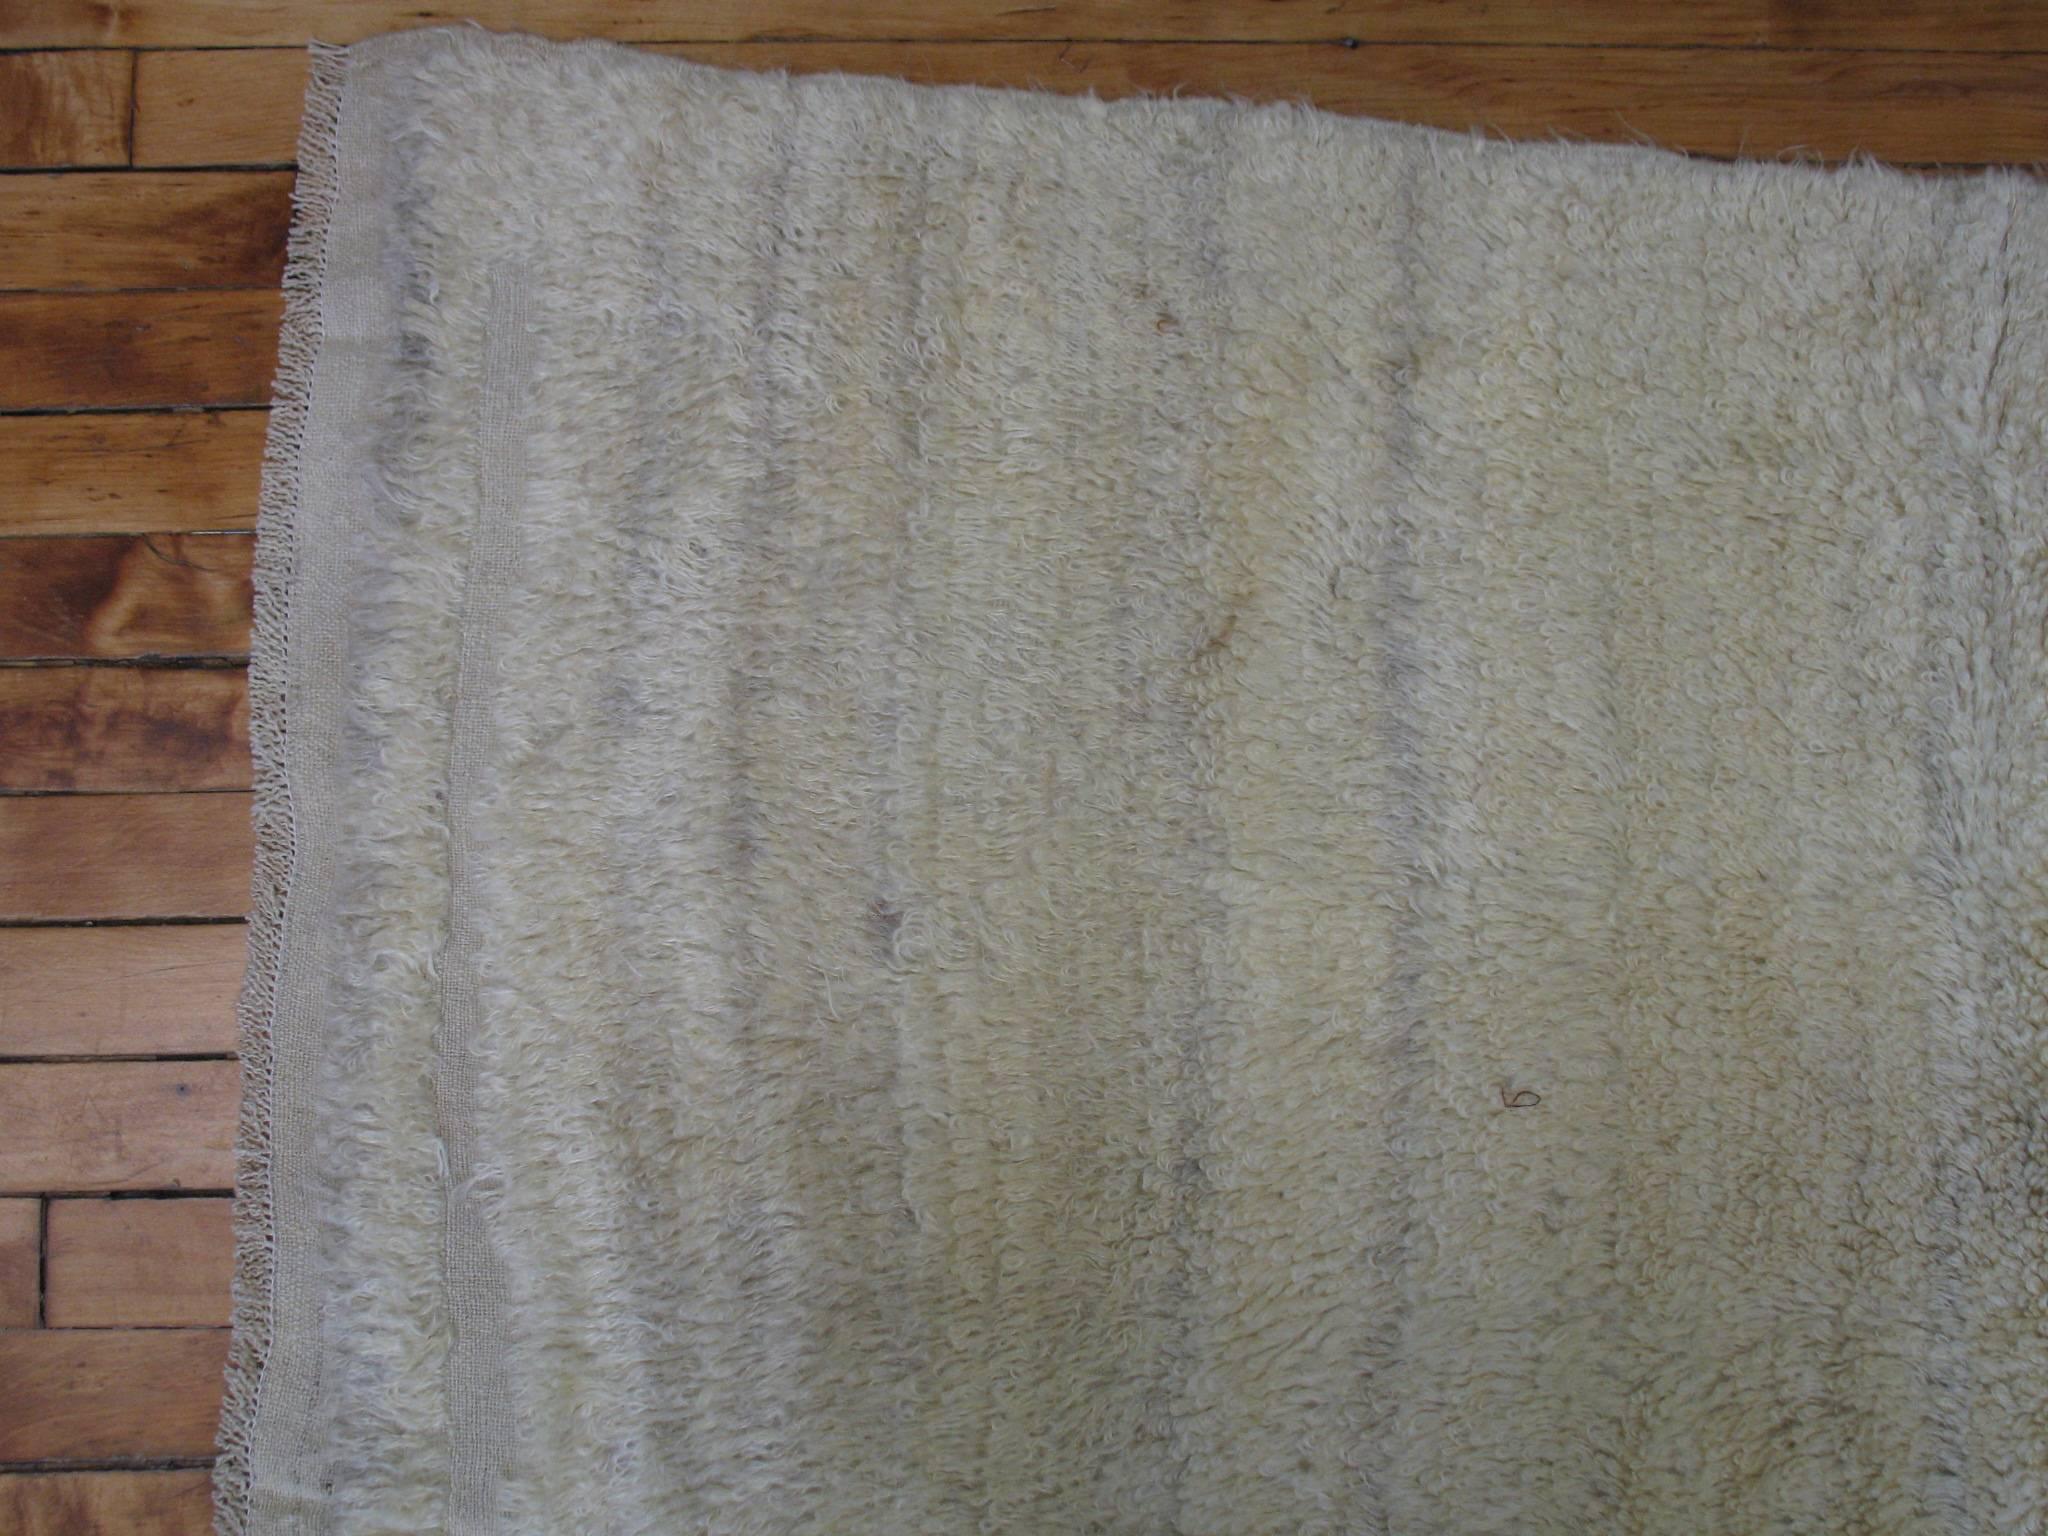 A midcentury Turkish long pile rug having an open creamy yellow field. Pics seen are with and without a flash.

Measures: 4'9